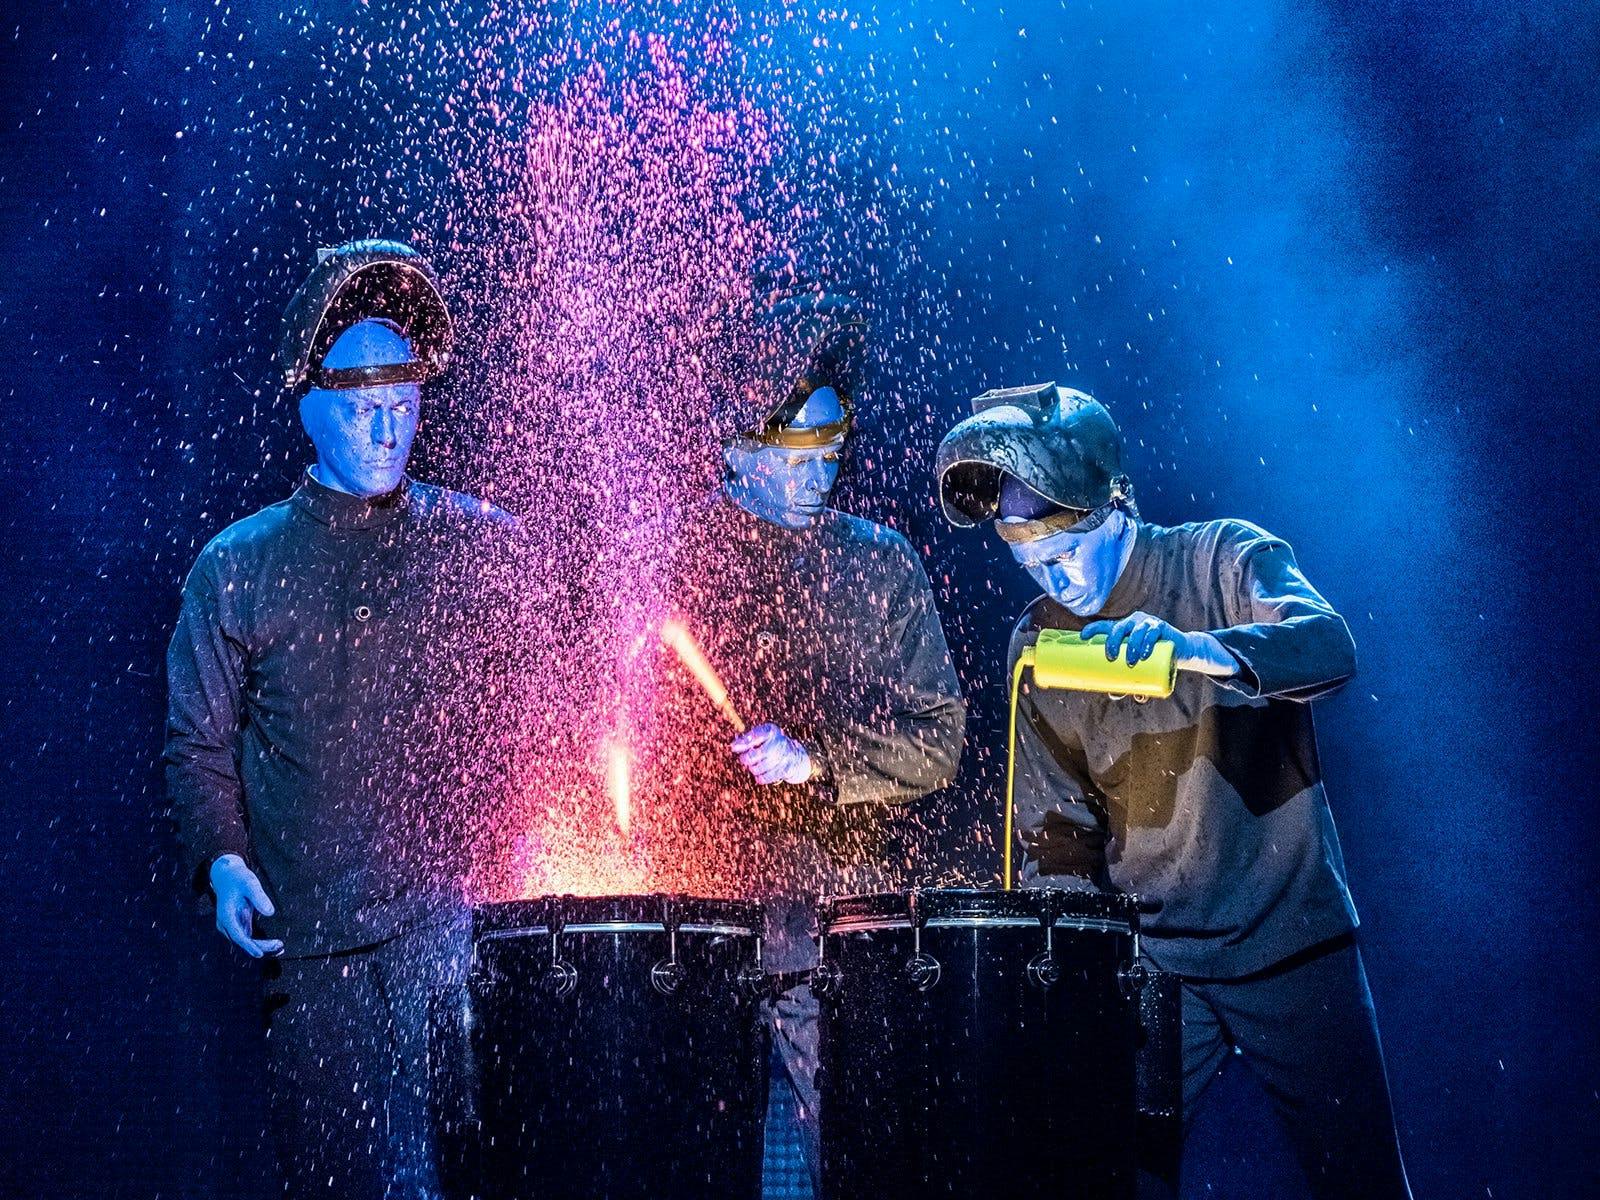 Chicago Blue Man Group's show tickets